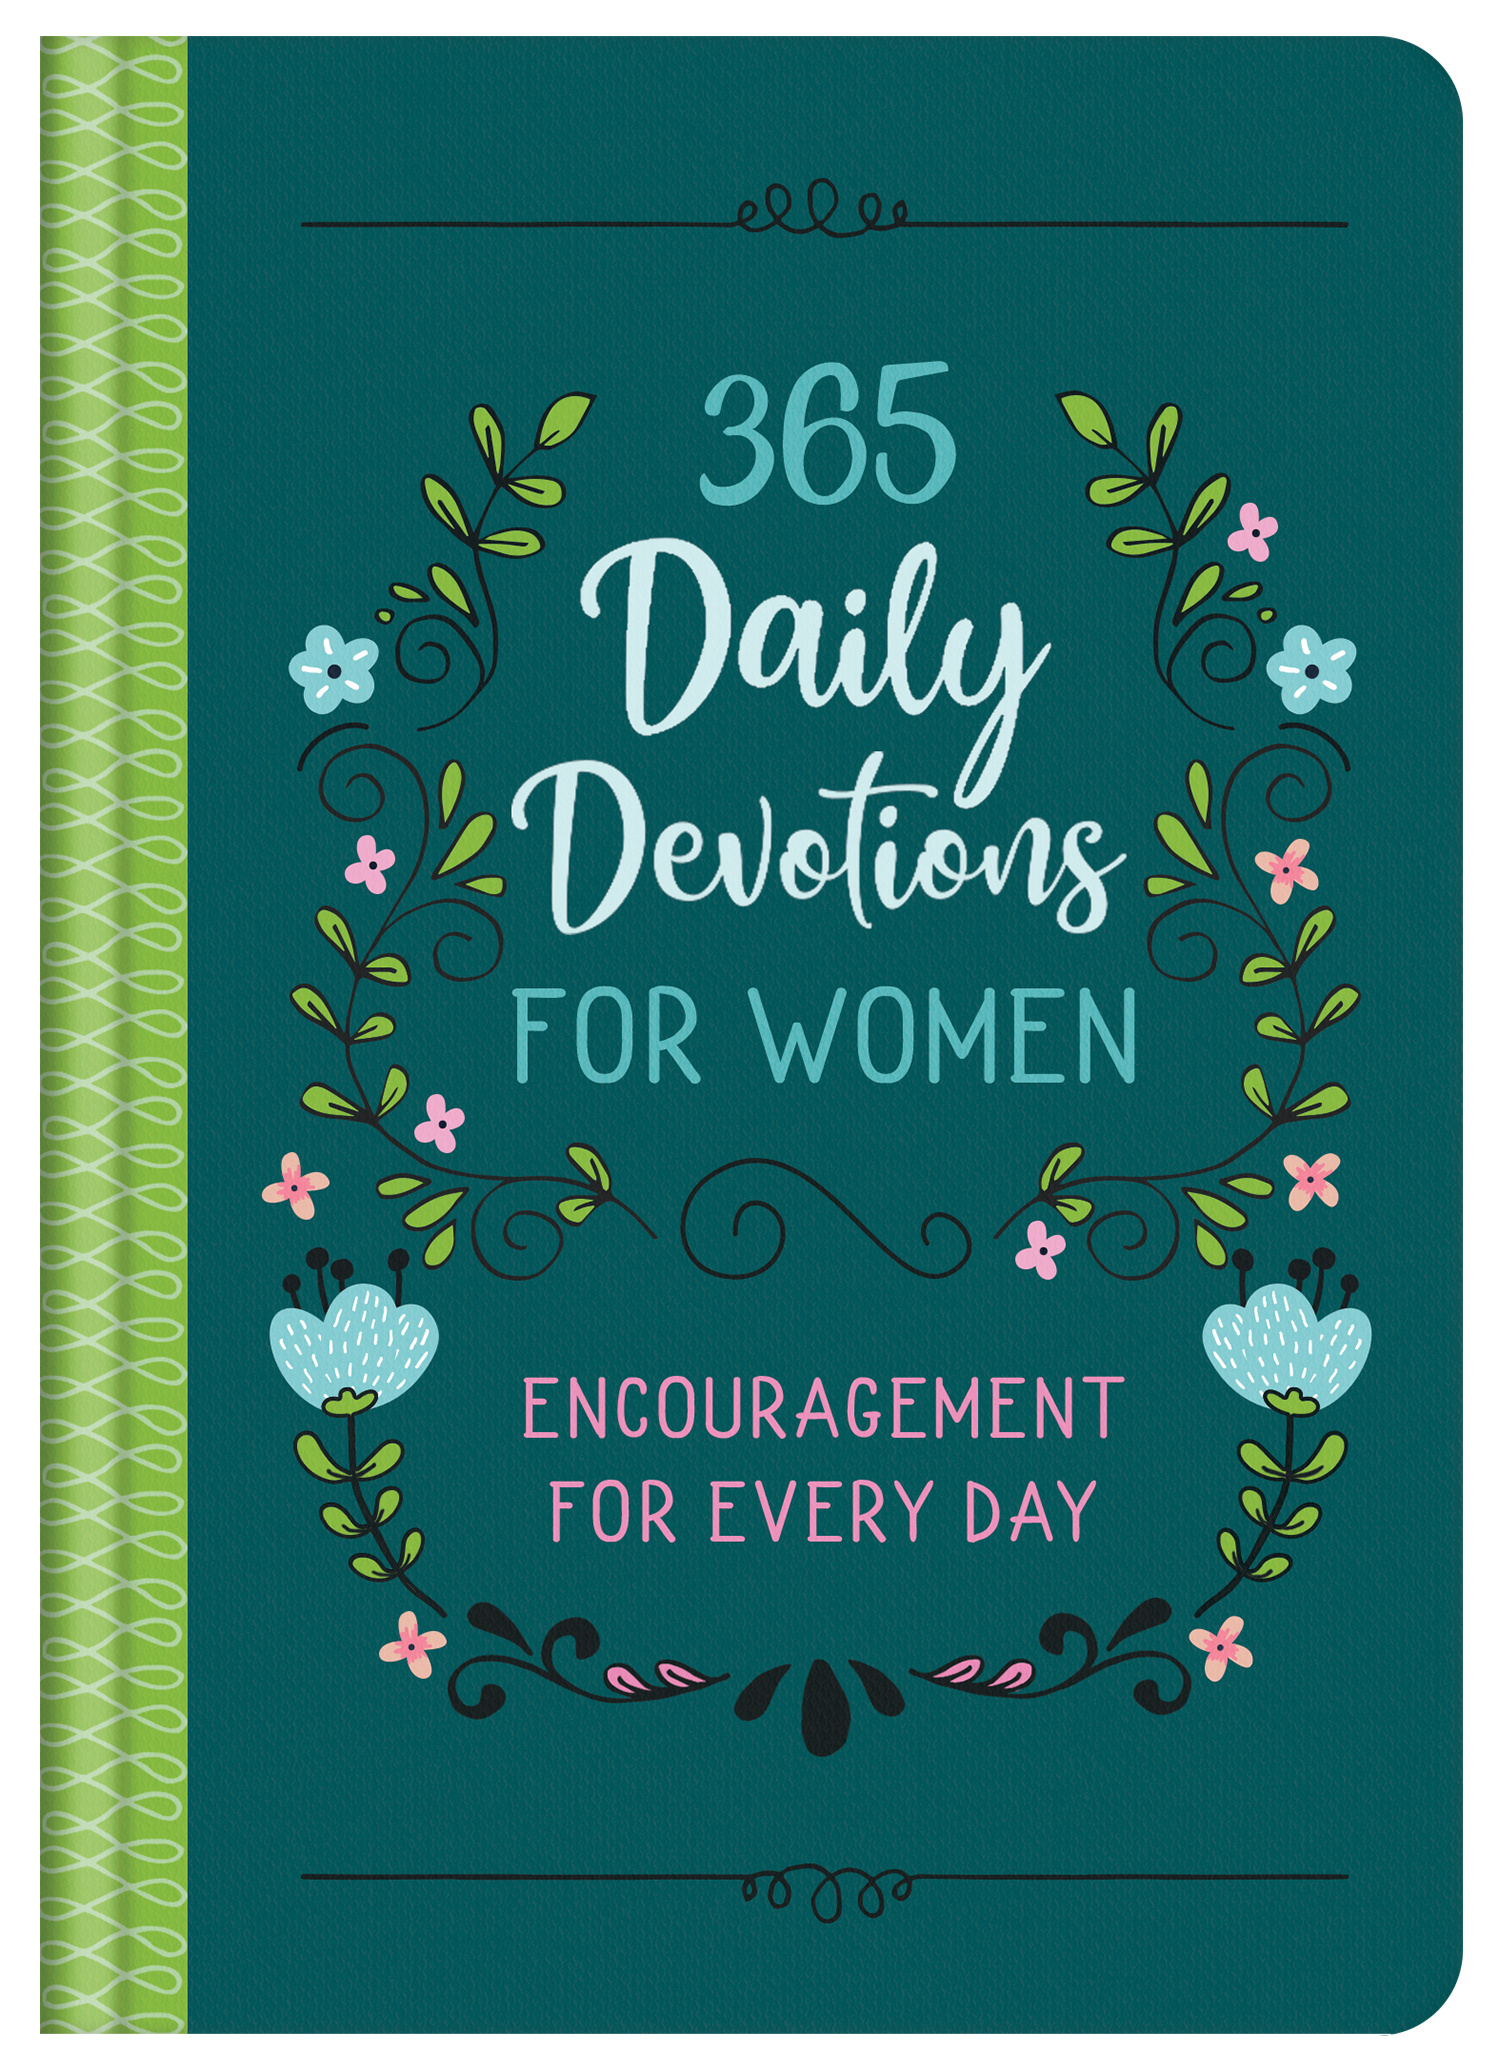 365 Daily Devotions for Women Free Delivery Eden.co.uk